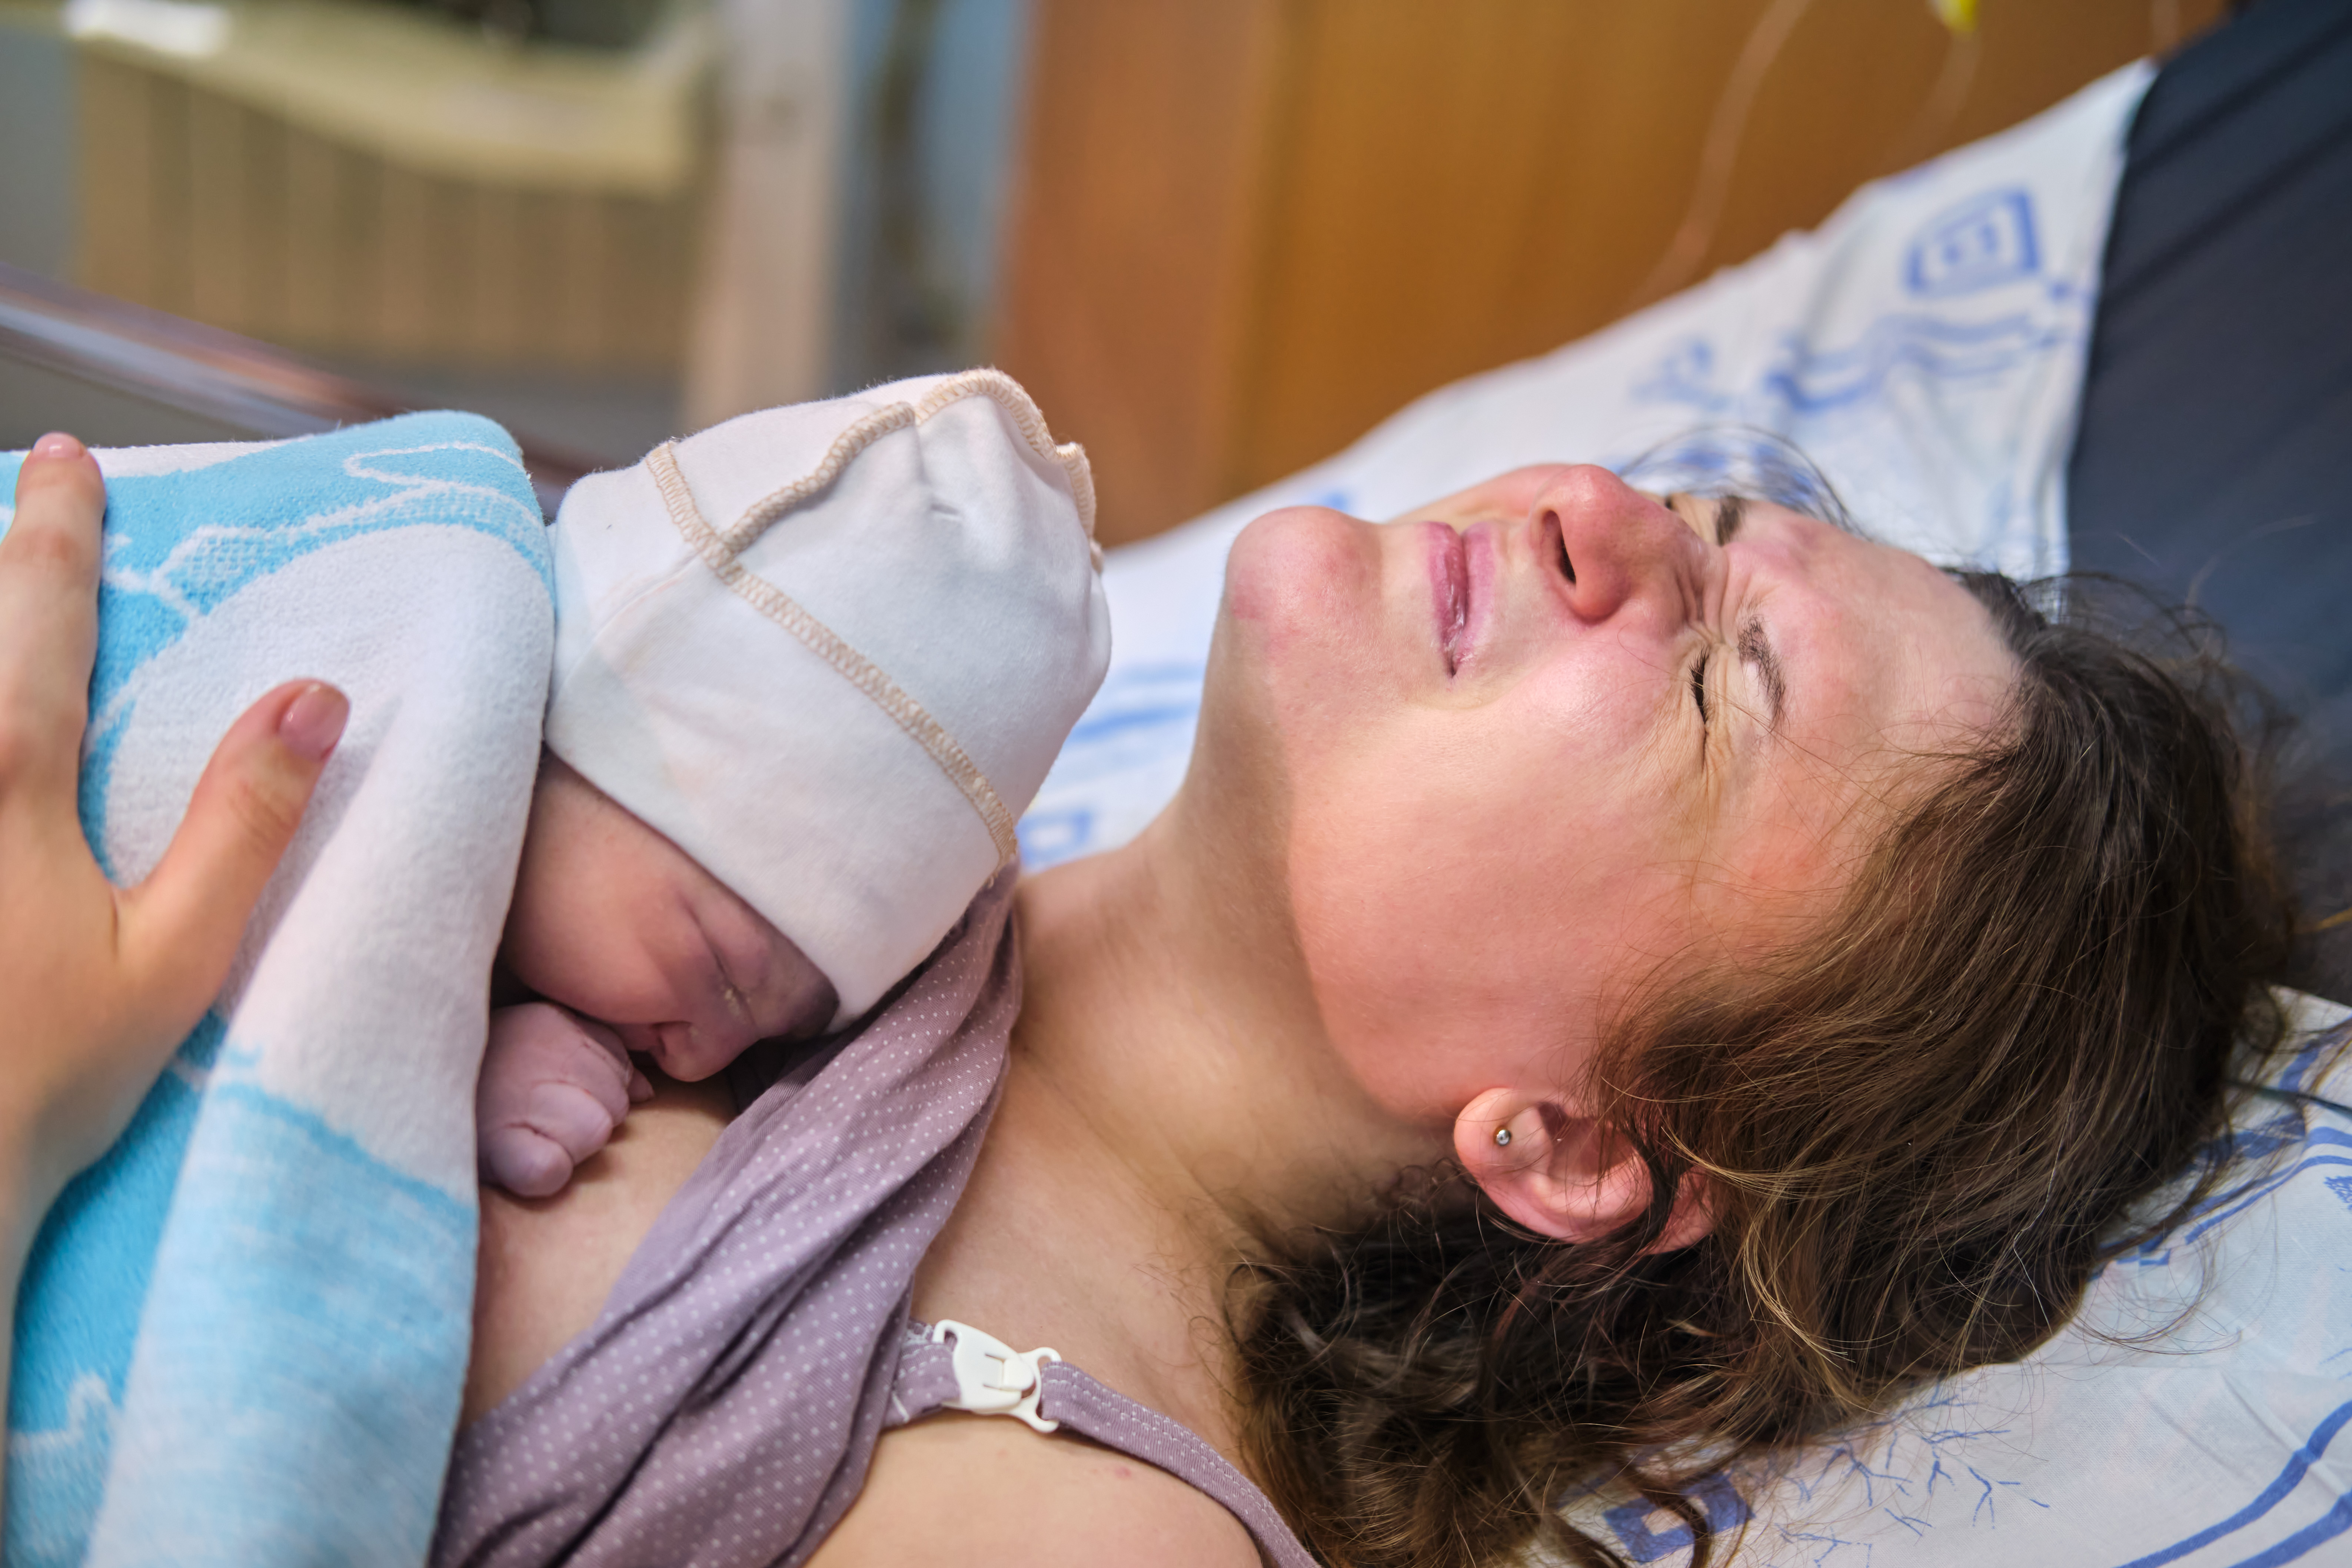 A woman who gave birth to a newborn baby | Source: Shutterstock.com